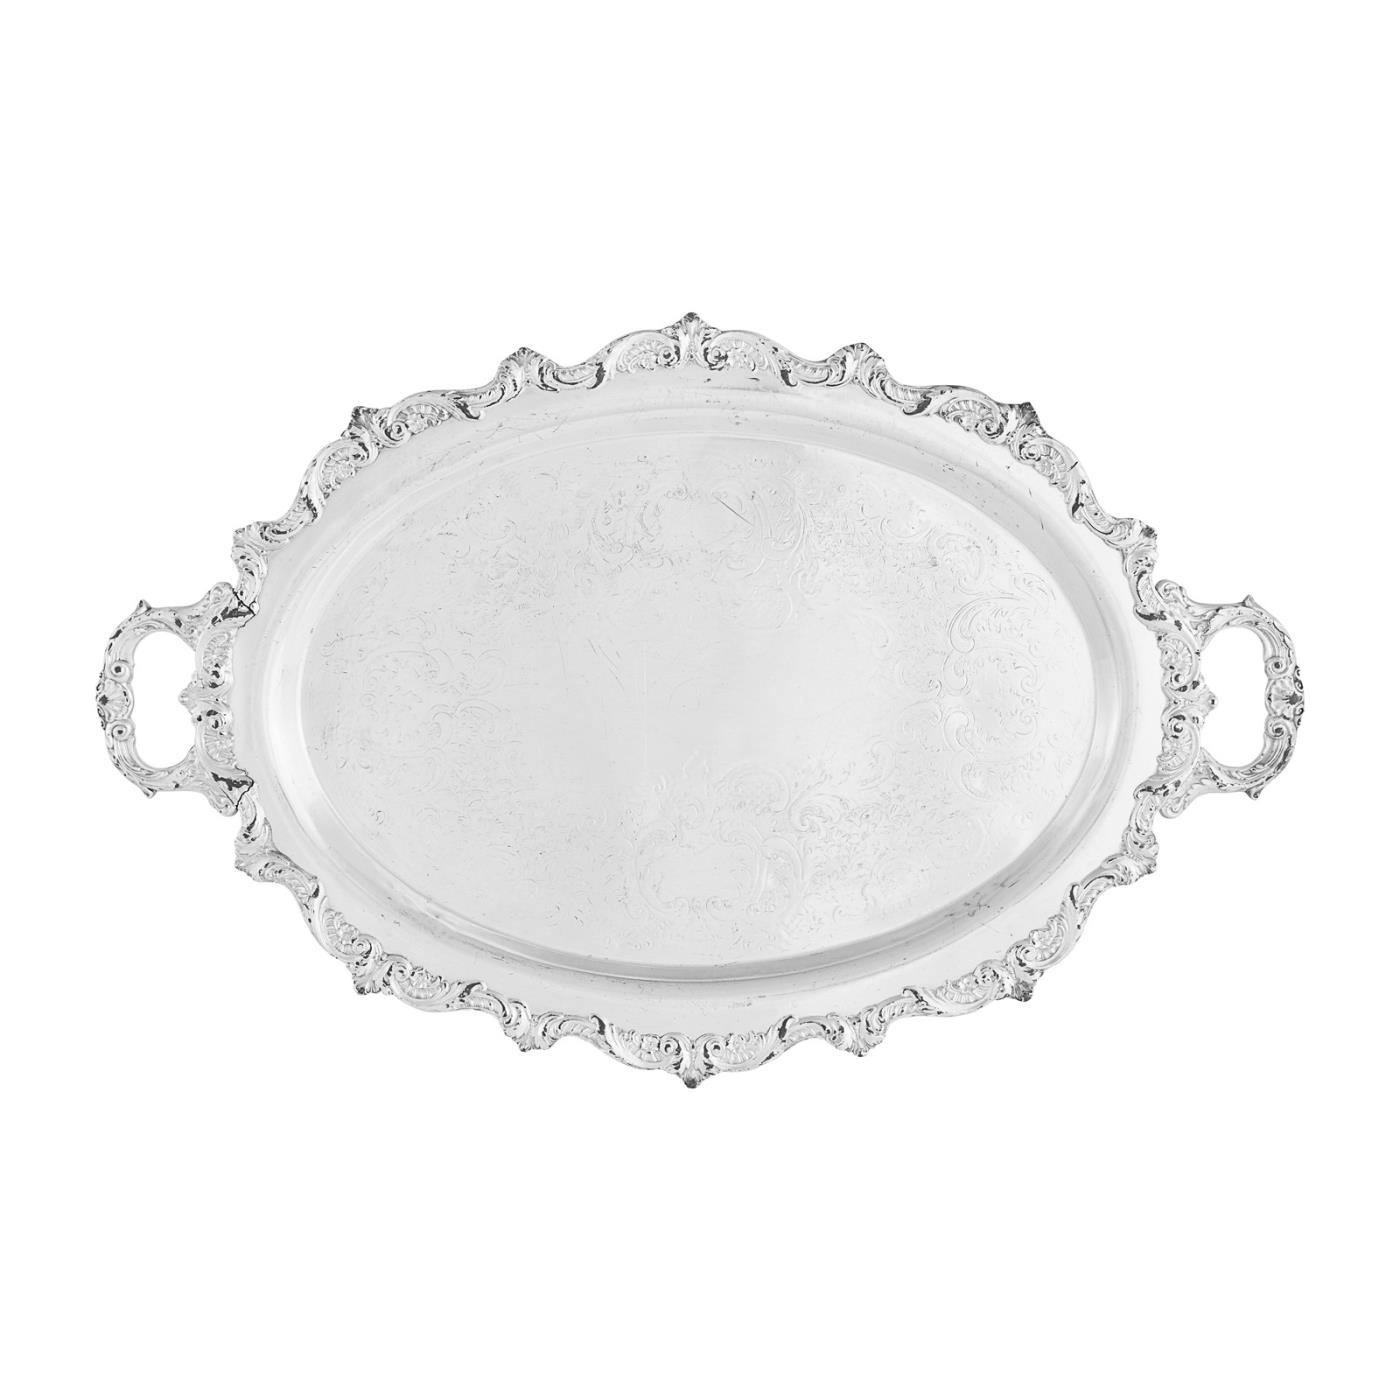 Silver Oval Tray With Handles Rentals NYC | SDPR NYC, NJ